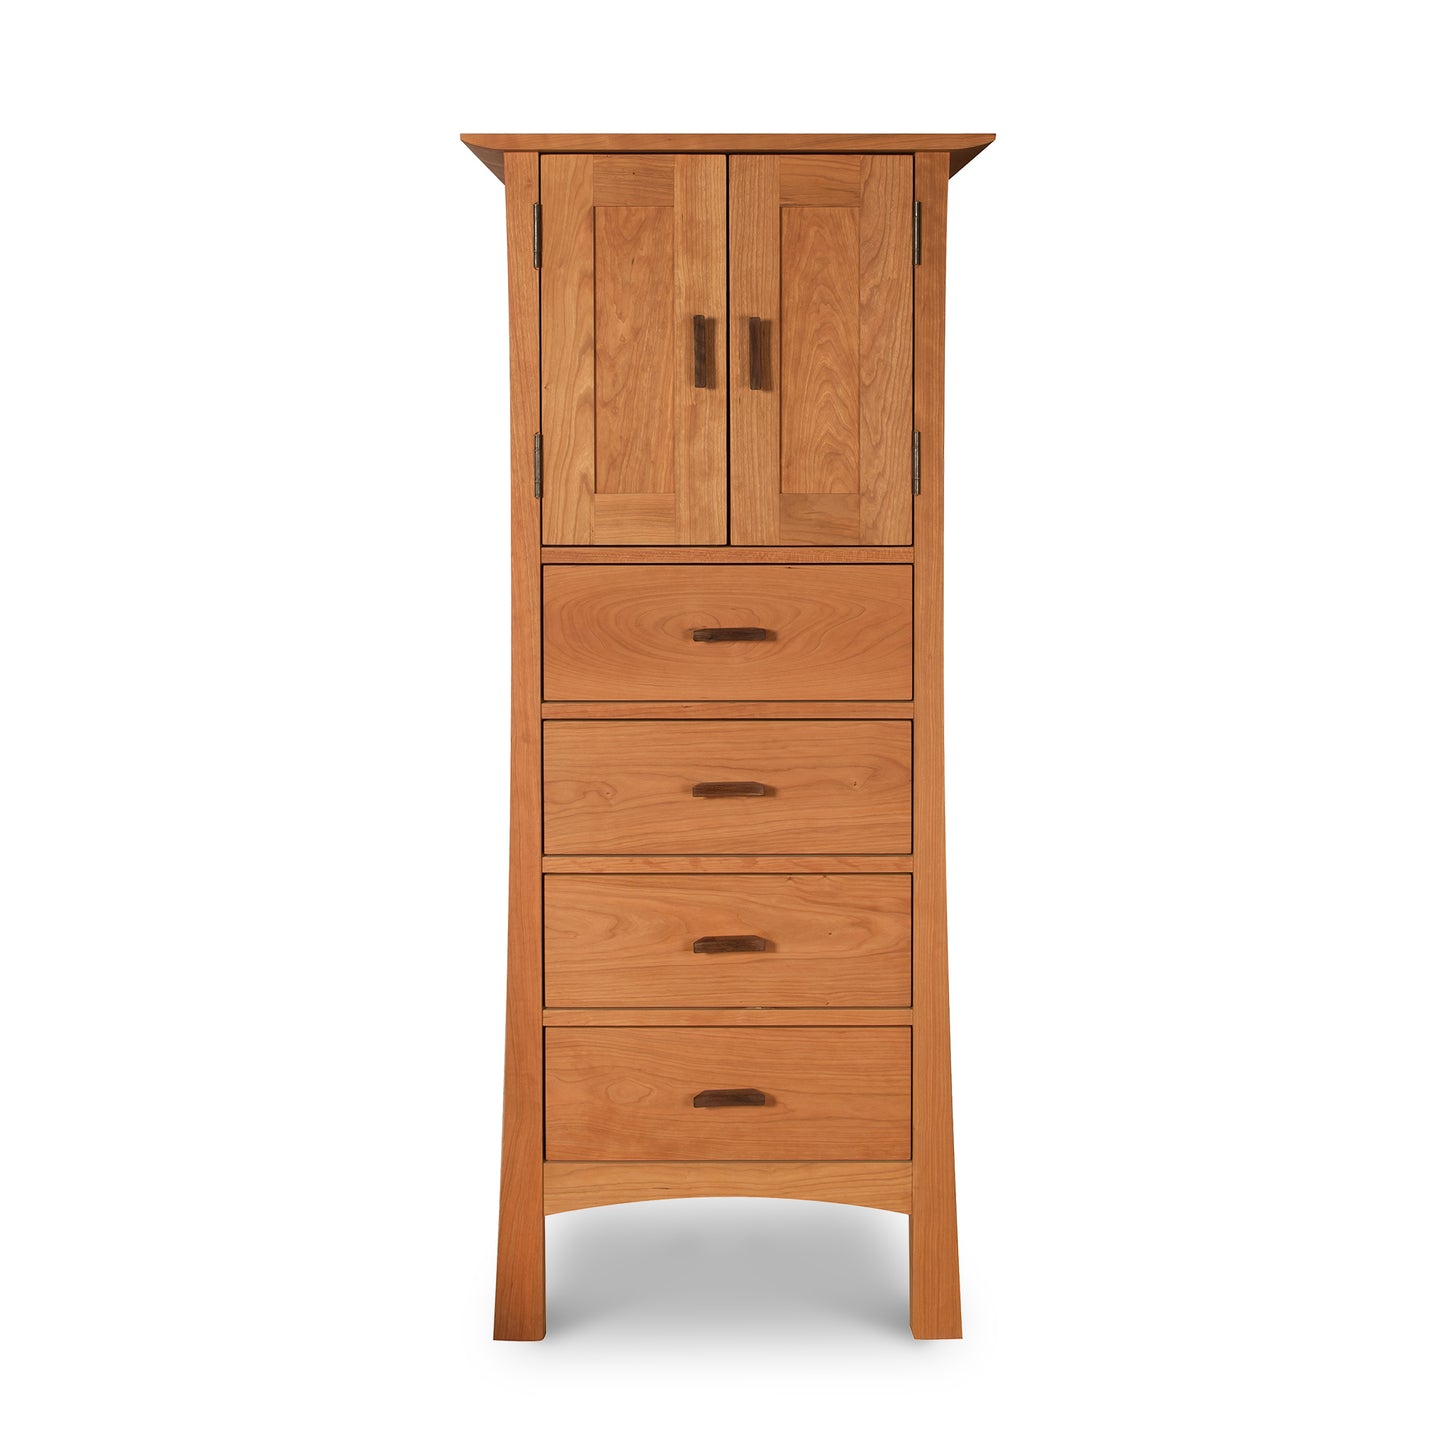 A Vermont Furniture Designs Contemporary Craftsman Tall Storage Chest with upper doors and four lower drawers, featuring an eco-friendly oil finish, isolated on a white background.